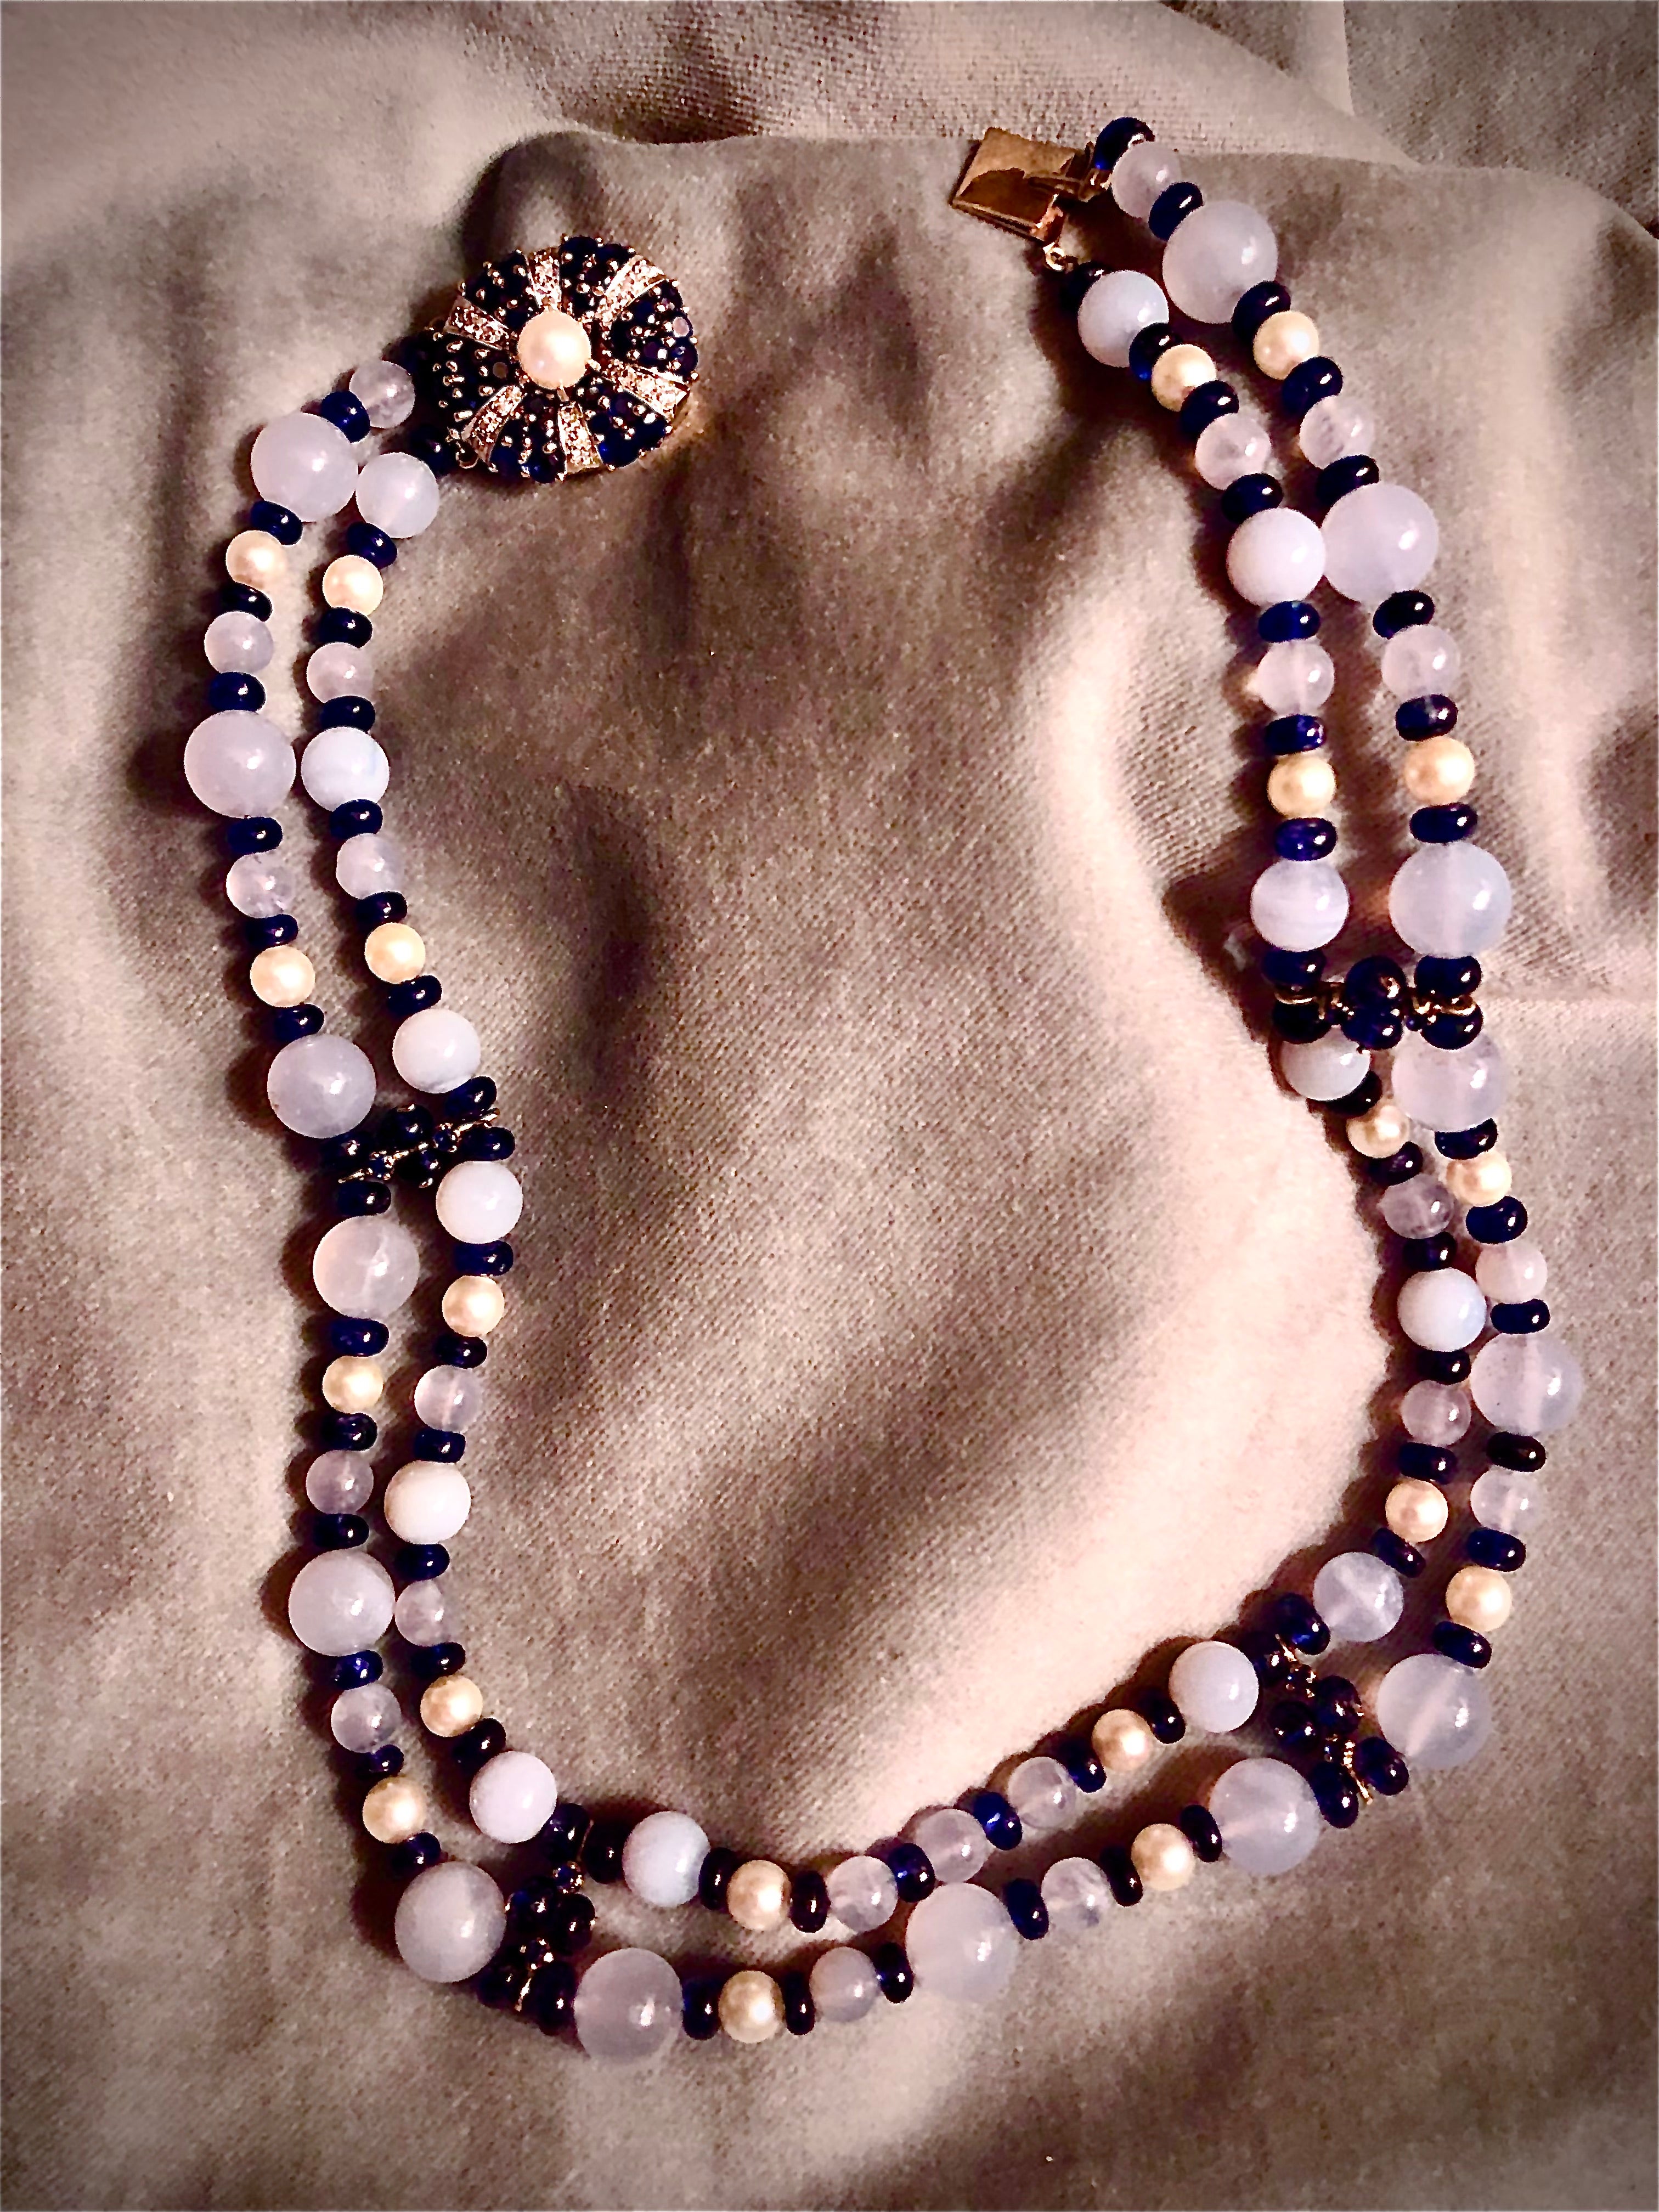 Icy and opulent high style double strand fine blue translucent chalcedony beads flanked by smooth rich blue sapphire rondelles which are then centered on fine creamy white round cultured pearls. The two strands of lavishly strung beads are separated